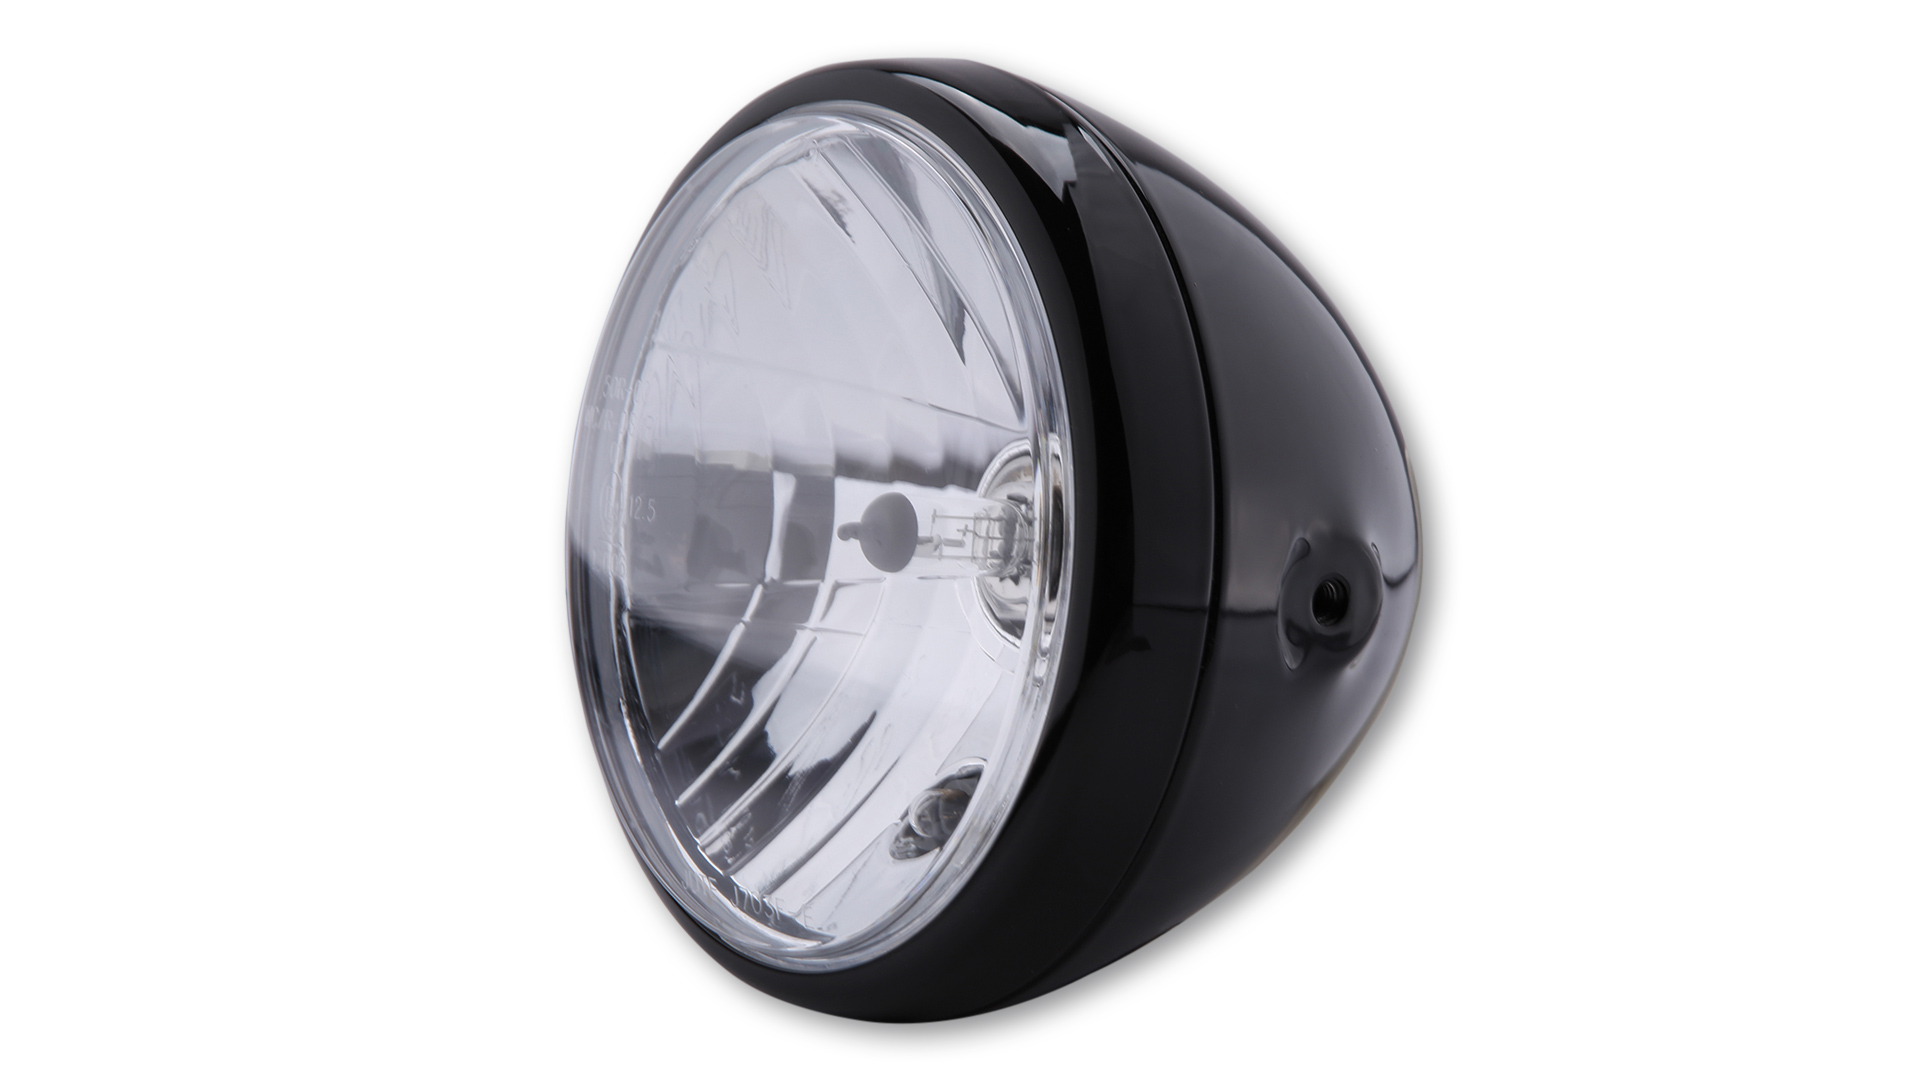 SHIN YO 7 inch headlight RENO, metal housing, clear glass (prismatic reflector), round, side mounting, E-approved